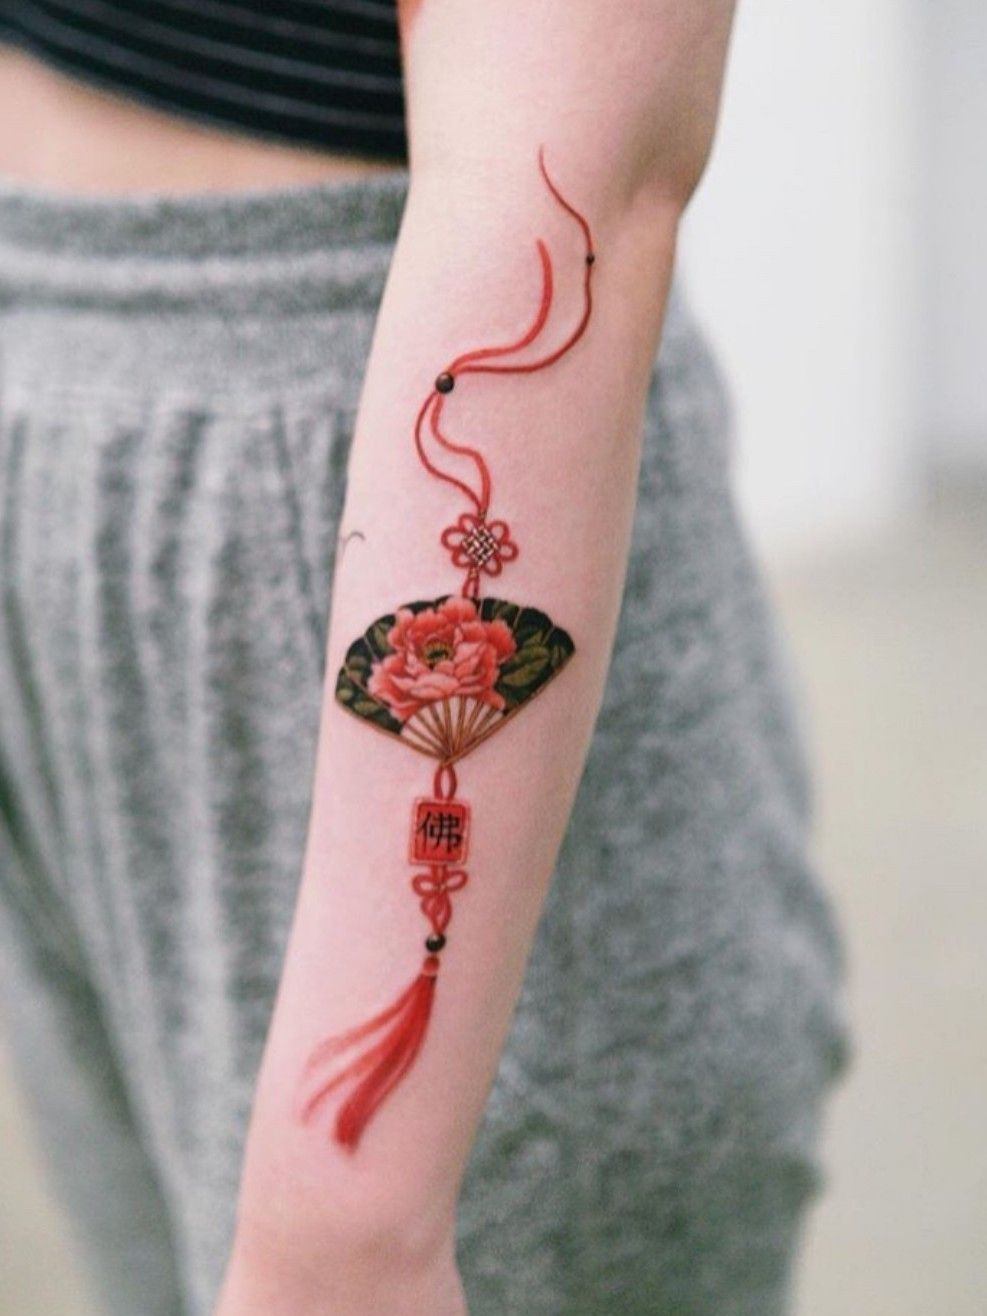 Tattoo uploaded by SION • Red peony fan with her grandmother's protection  charm #tattoo #norigaetattoo #fantattoo #peonytattoo #colortattoo  #flowertattoo #tattooistsion • Tattoodo